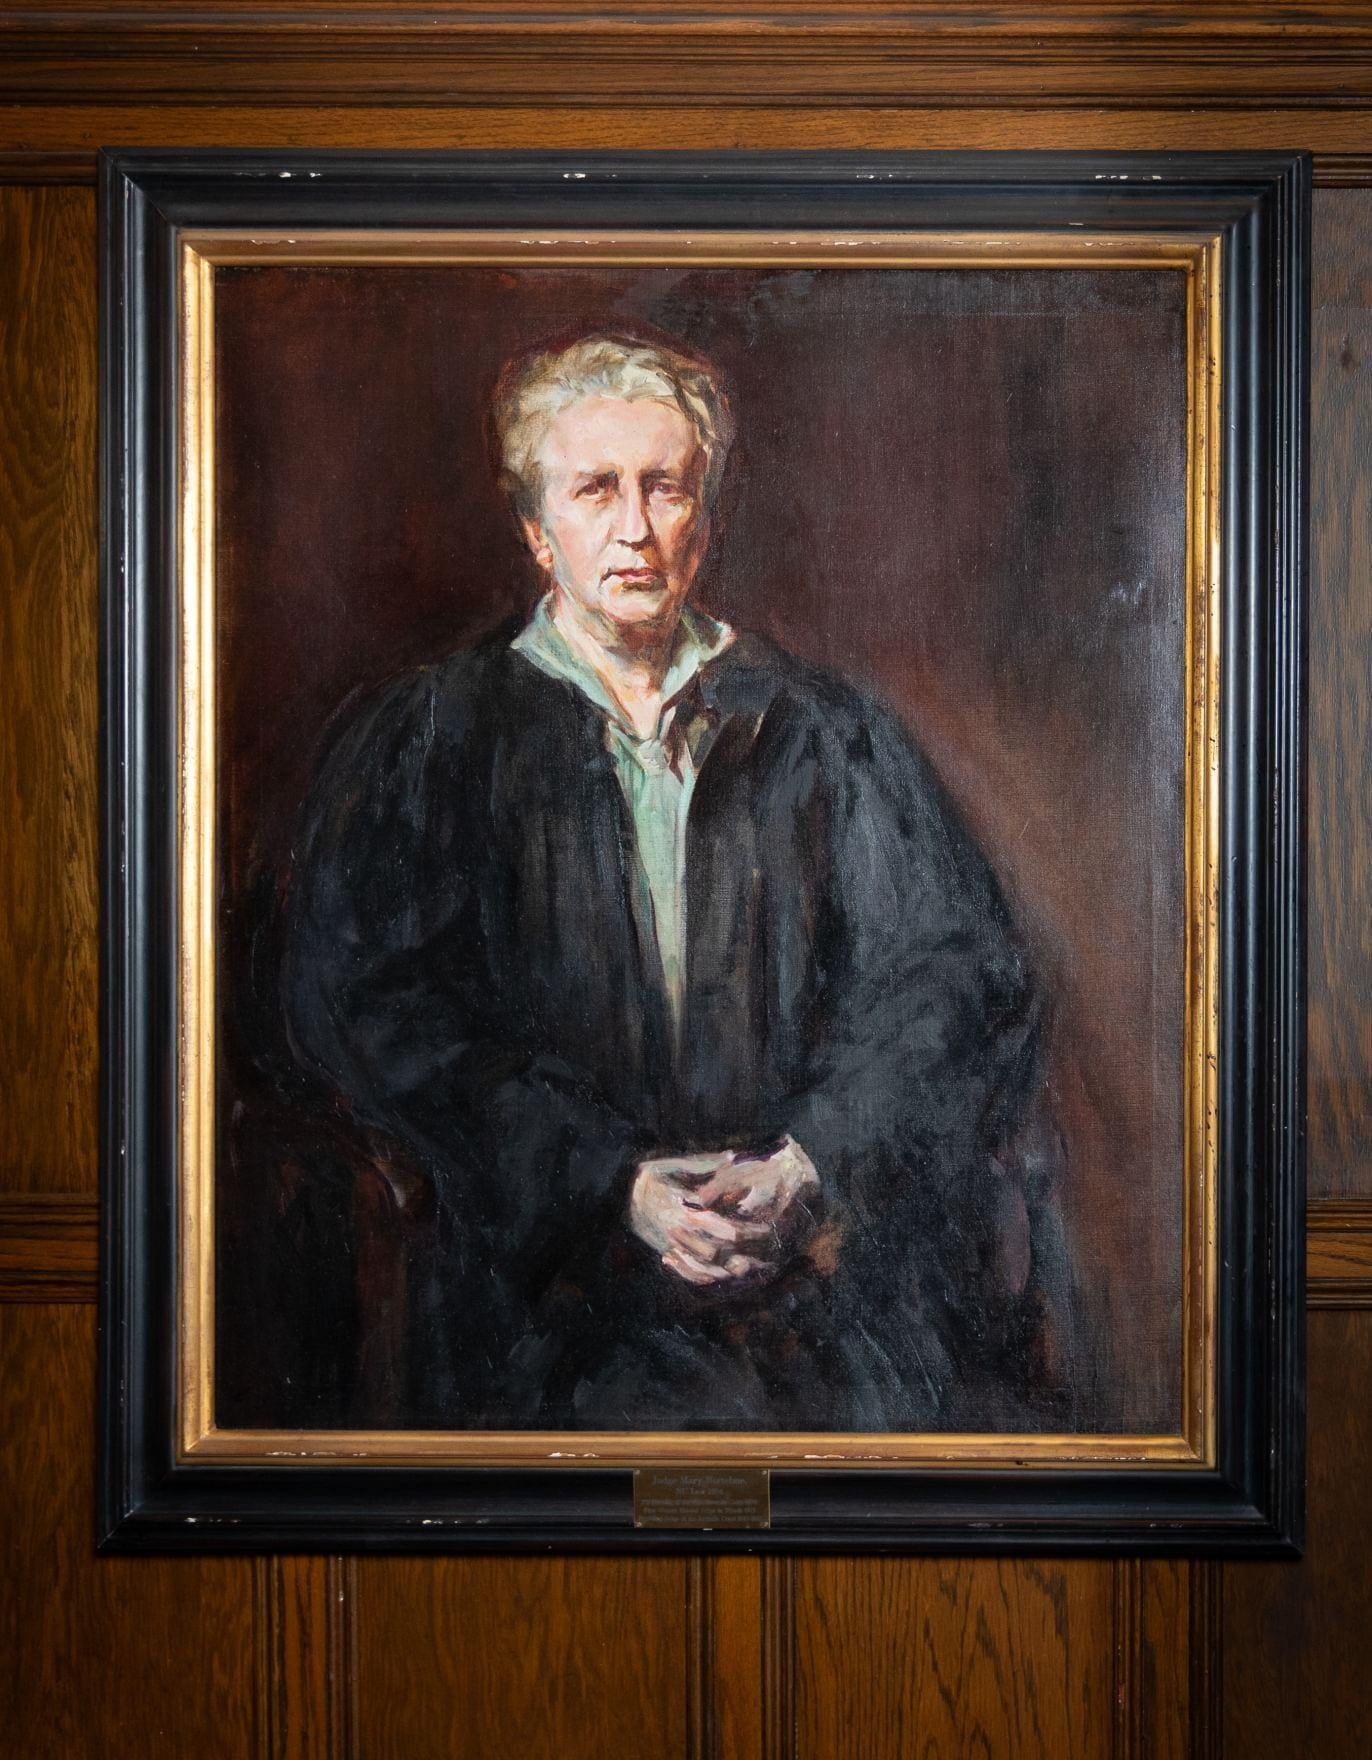 Straight-face woman in black judicial robes and light green blouse. 